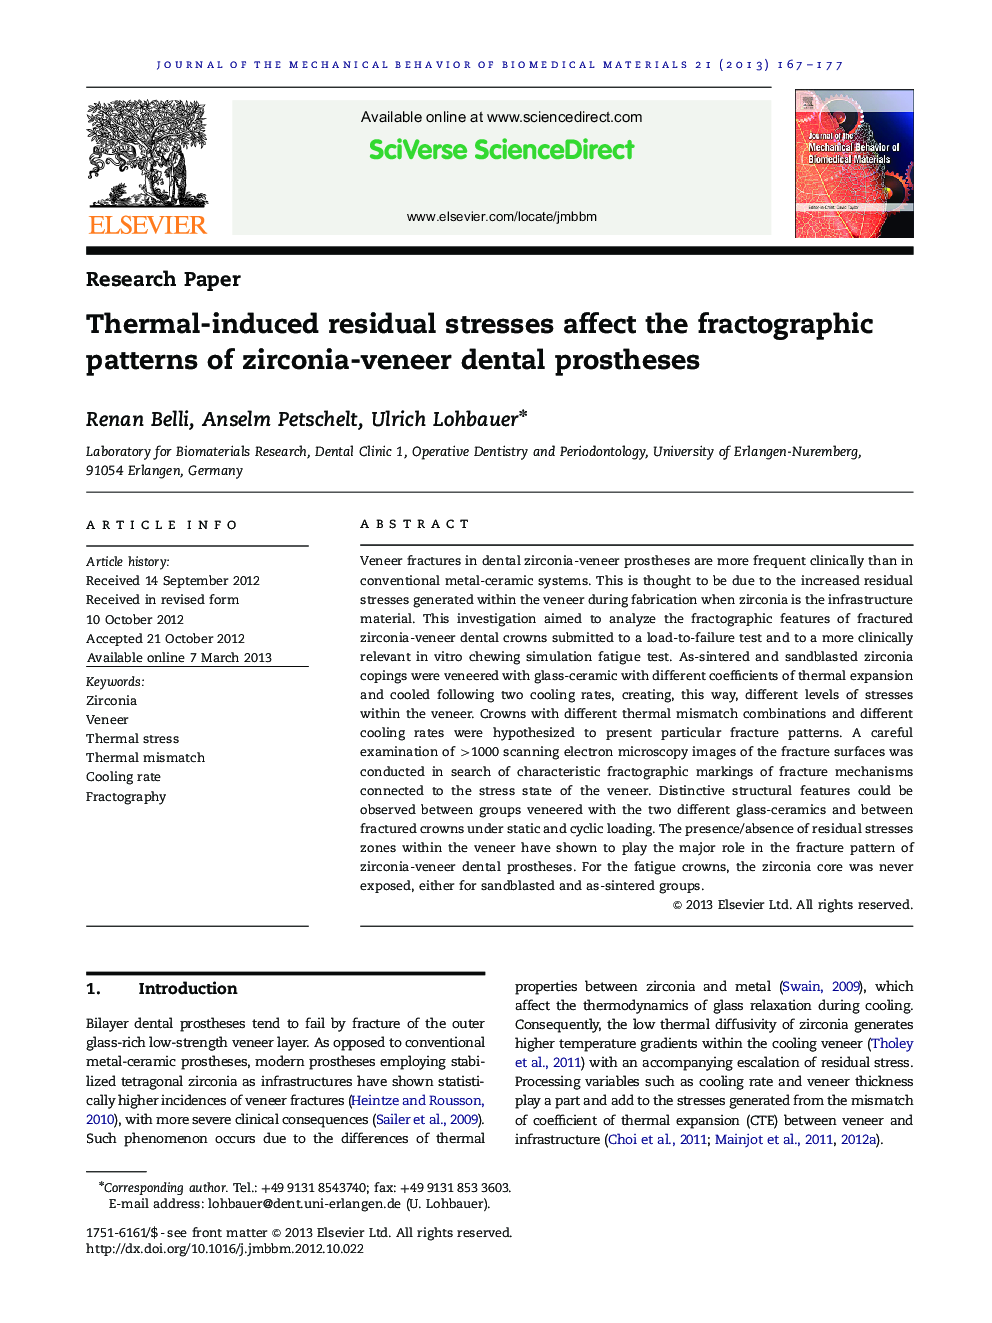 Thermal-induced residual stresses affect the fractographic patterns of zirconia-veneer dental prostheses